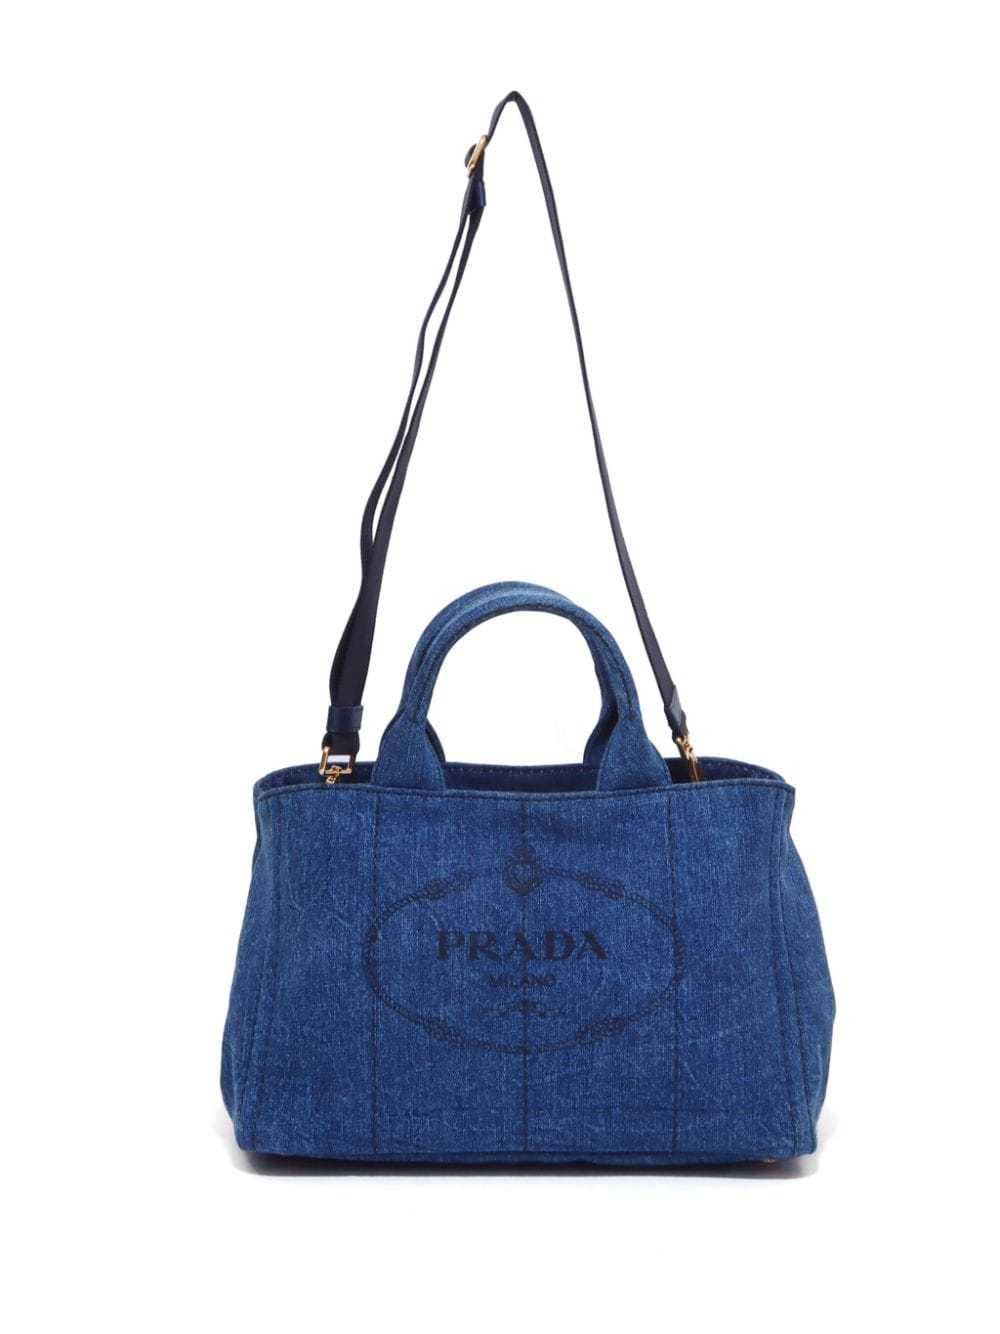 Prada Pre-Owned 2000s Canapa two-way bag - Blue - image 5